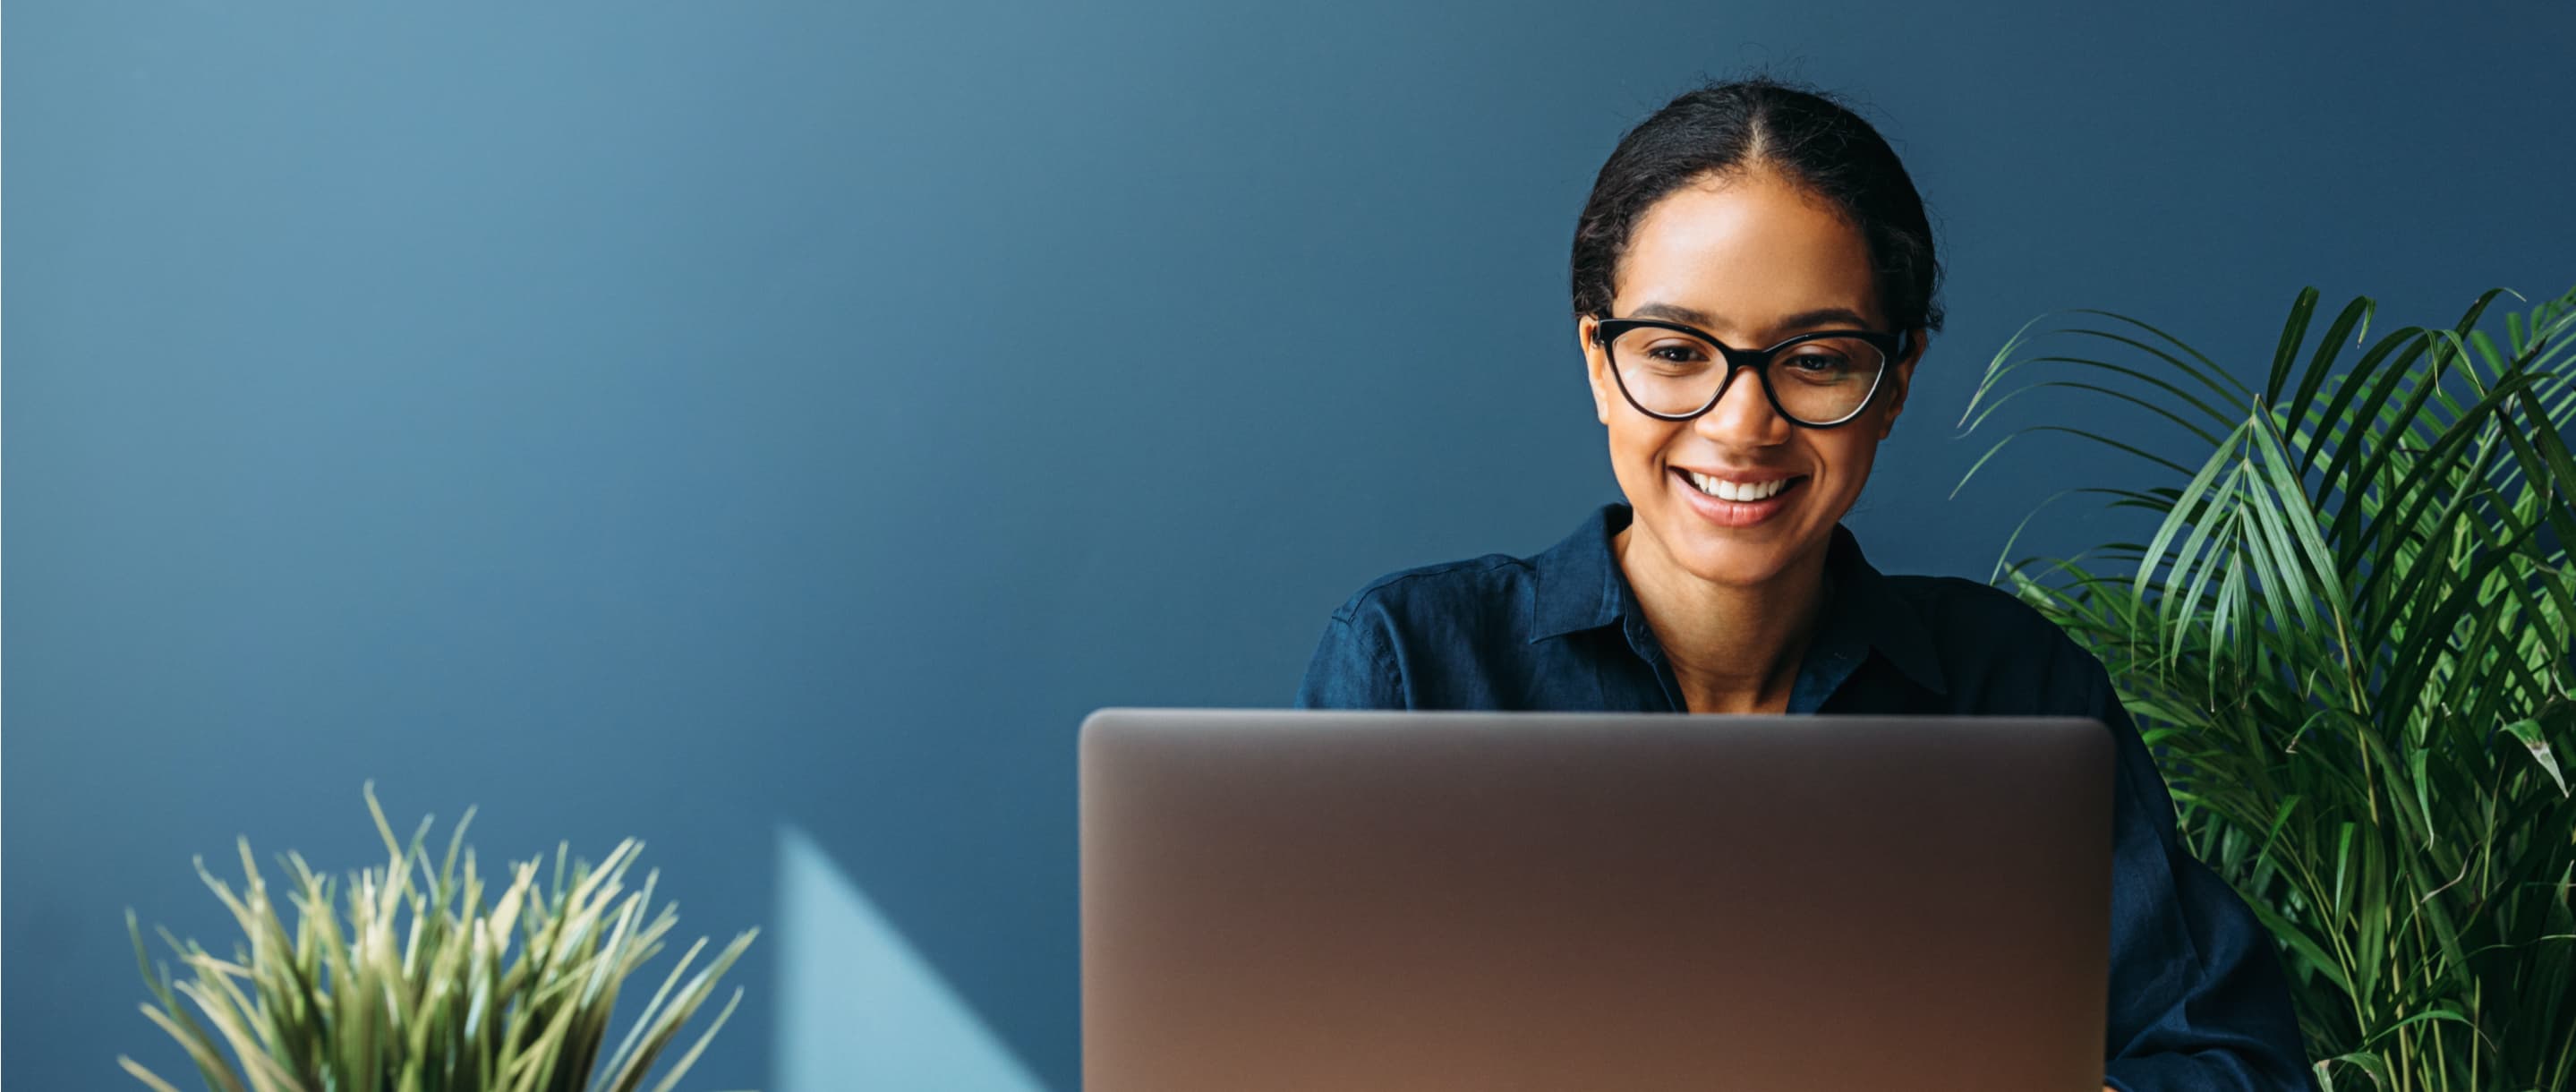 Woman with glasses smiling at laptop